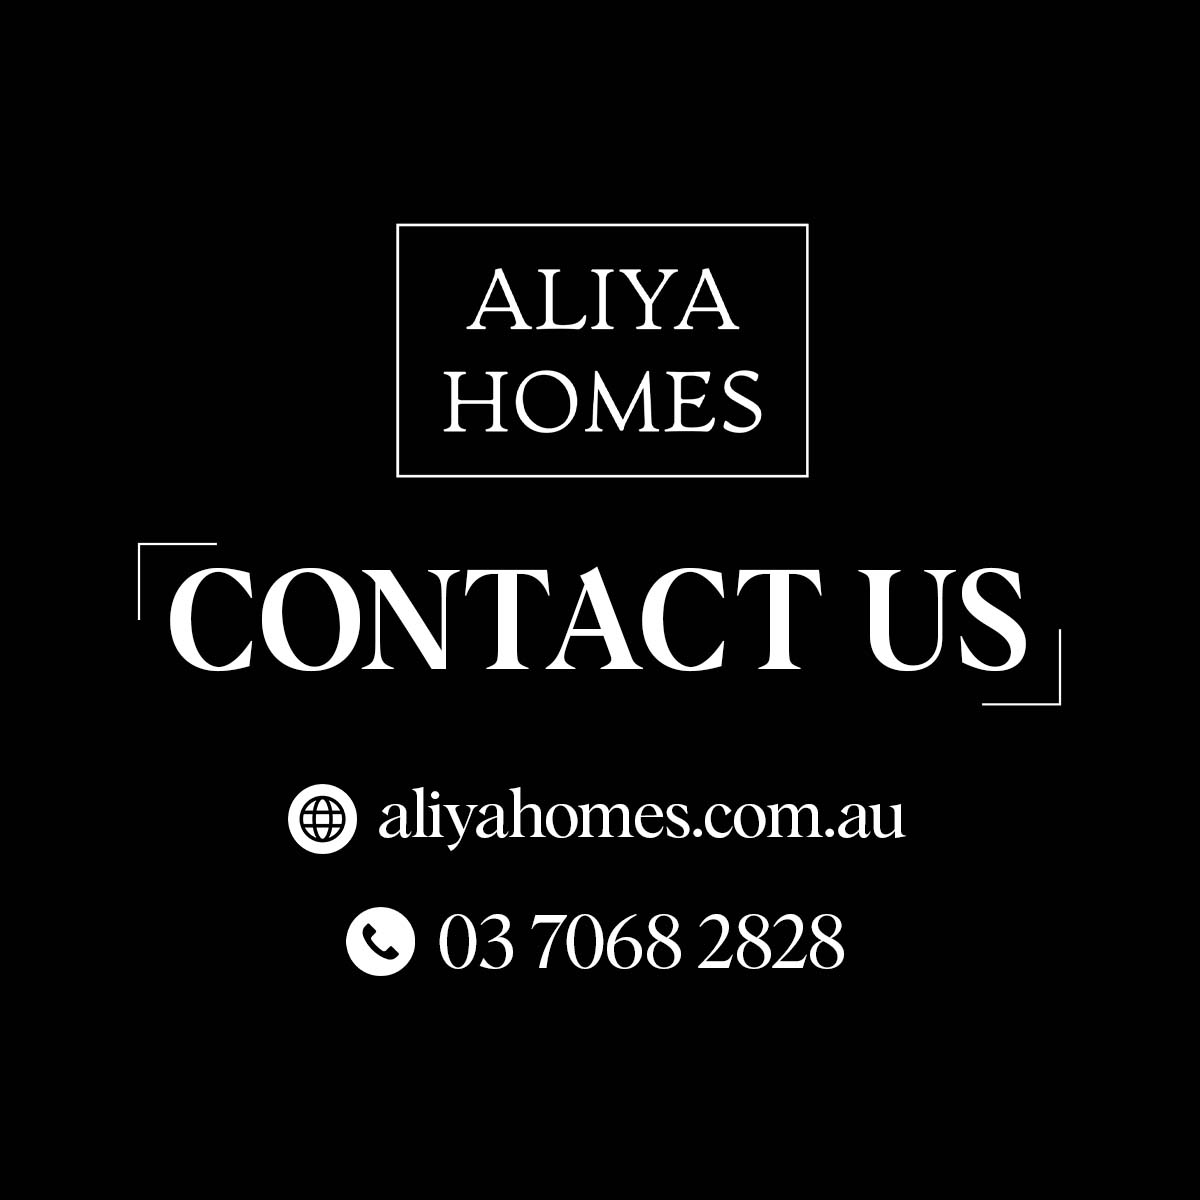 Location 📍Doncaster East
With Aliya Homes leading the way, this project is ready to go from the early stages of laying a foundation to becoming a strong and well-built structure.

#Aliyahomes #homeconstruction #constructionwork #workinprogress #newhome #workprogress #newproject